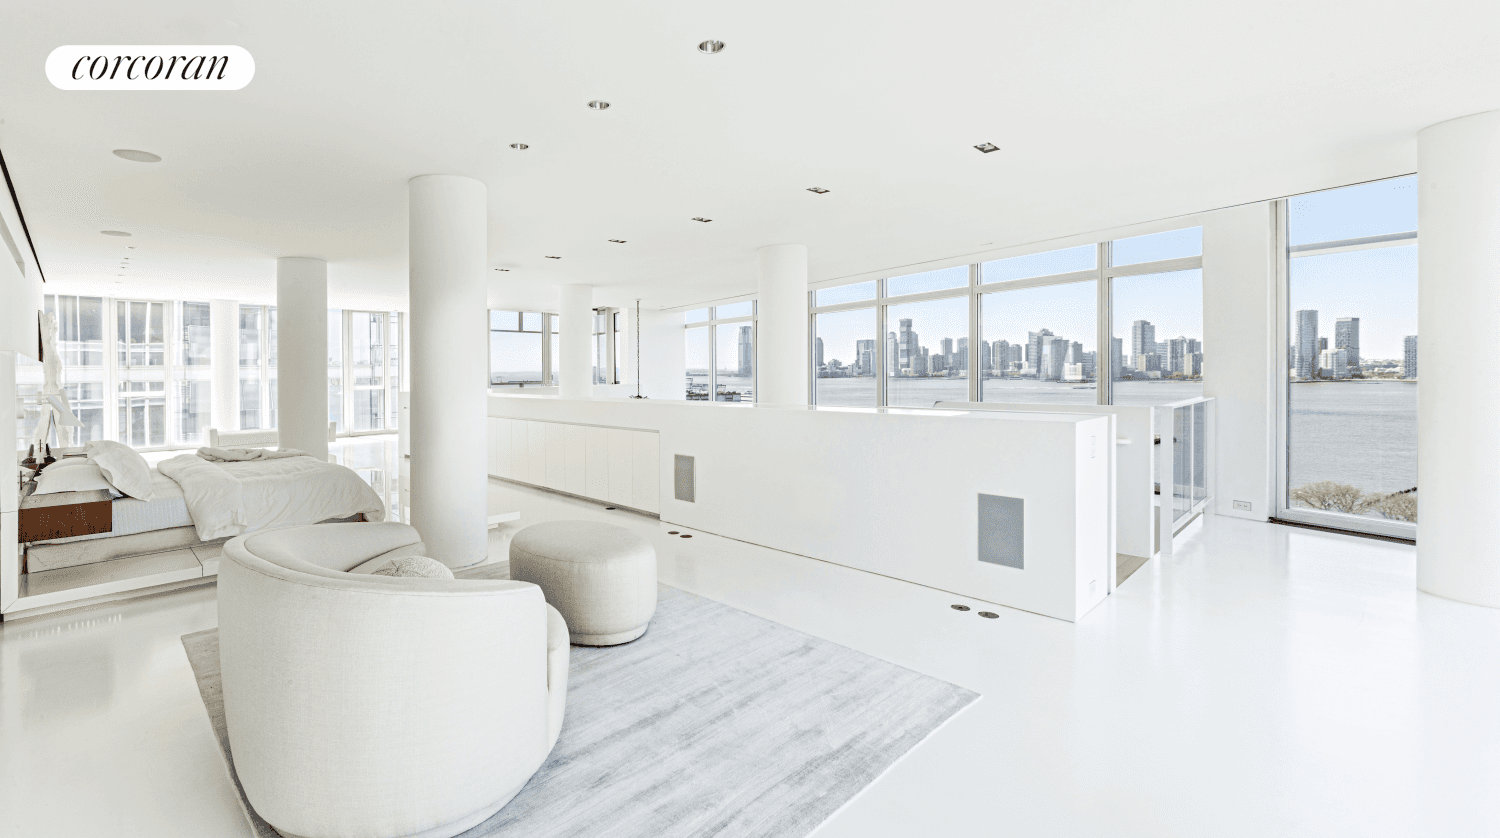 176 Perry Street is a modernist masterpiece designed by internationally acclaimed architect Richard Meier.